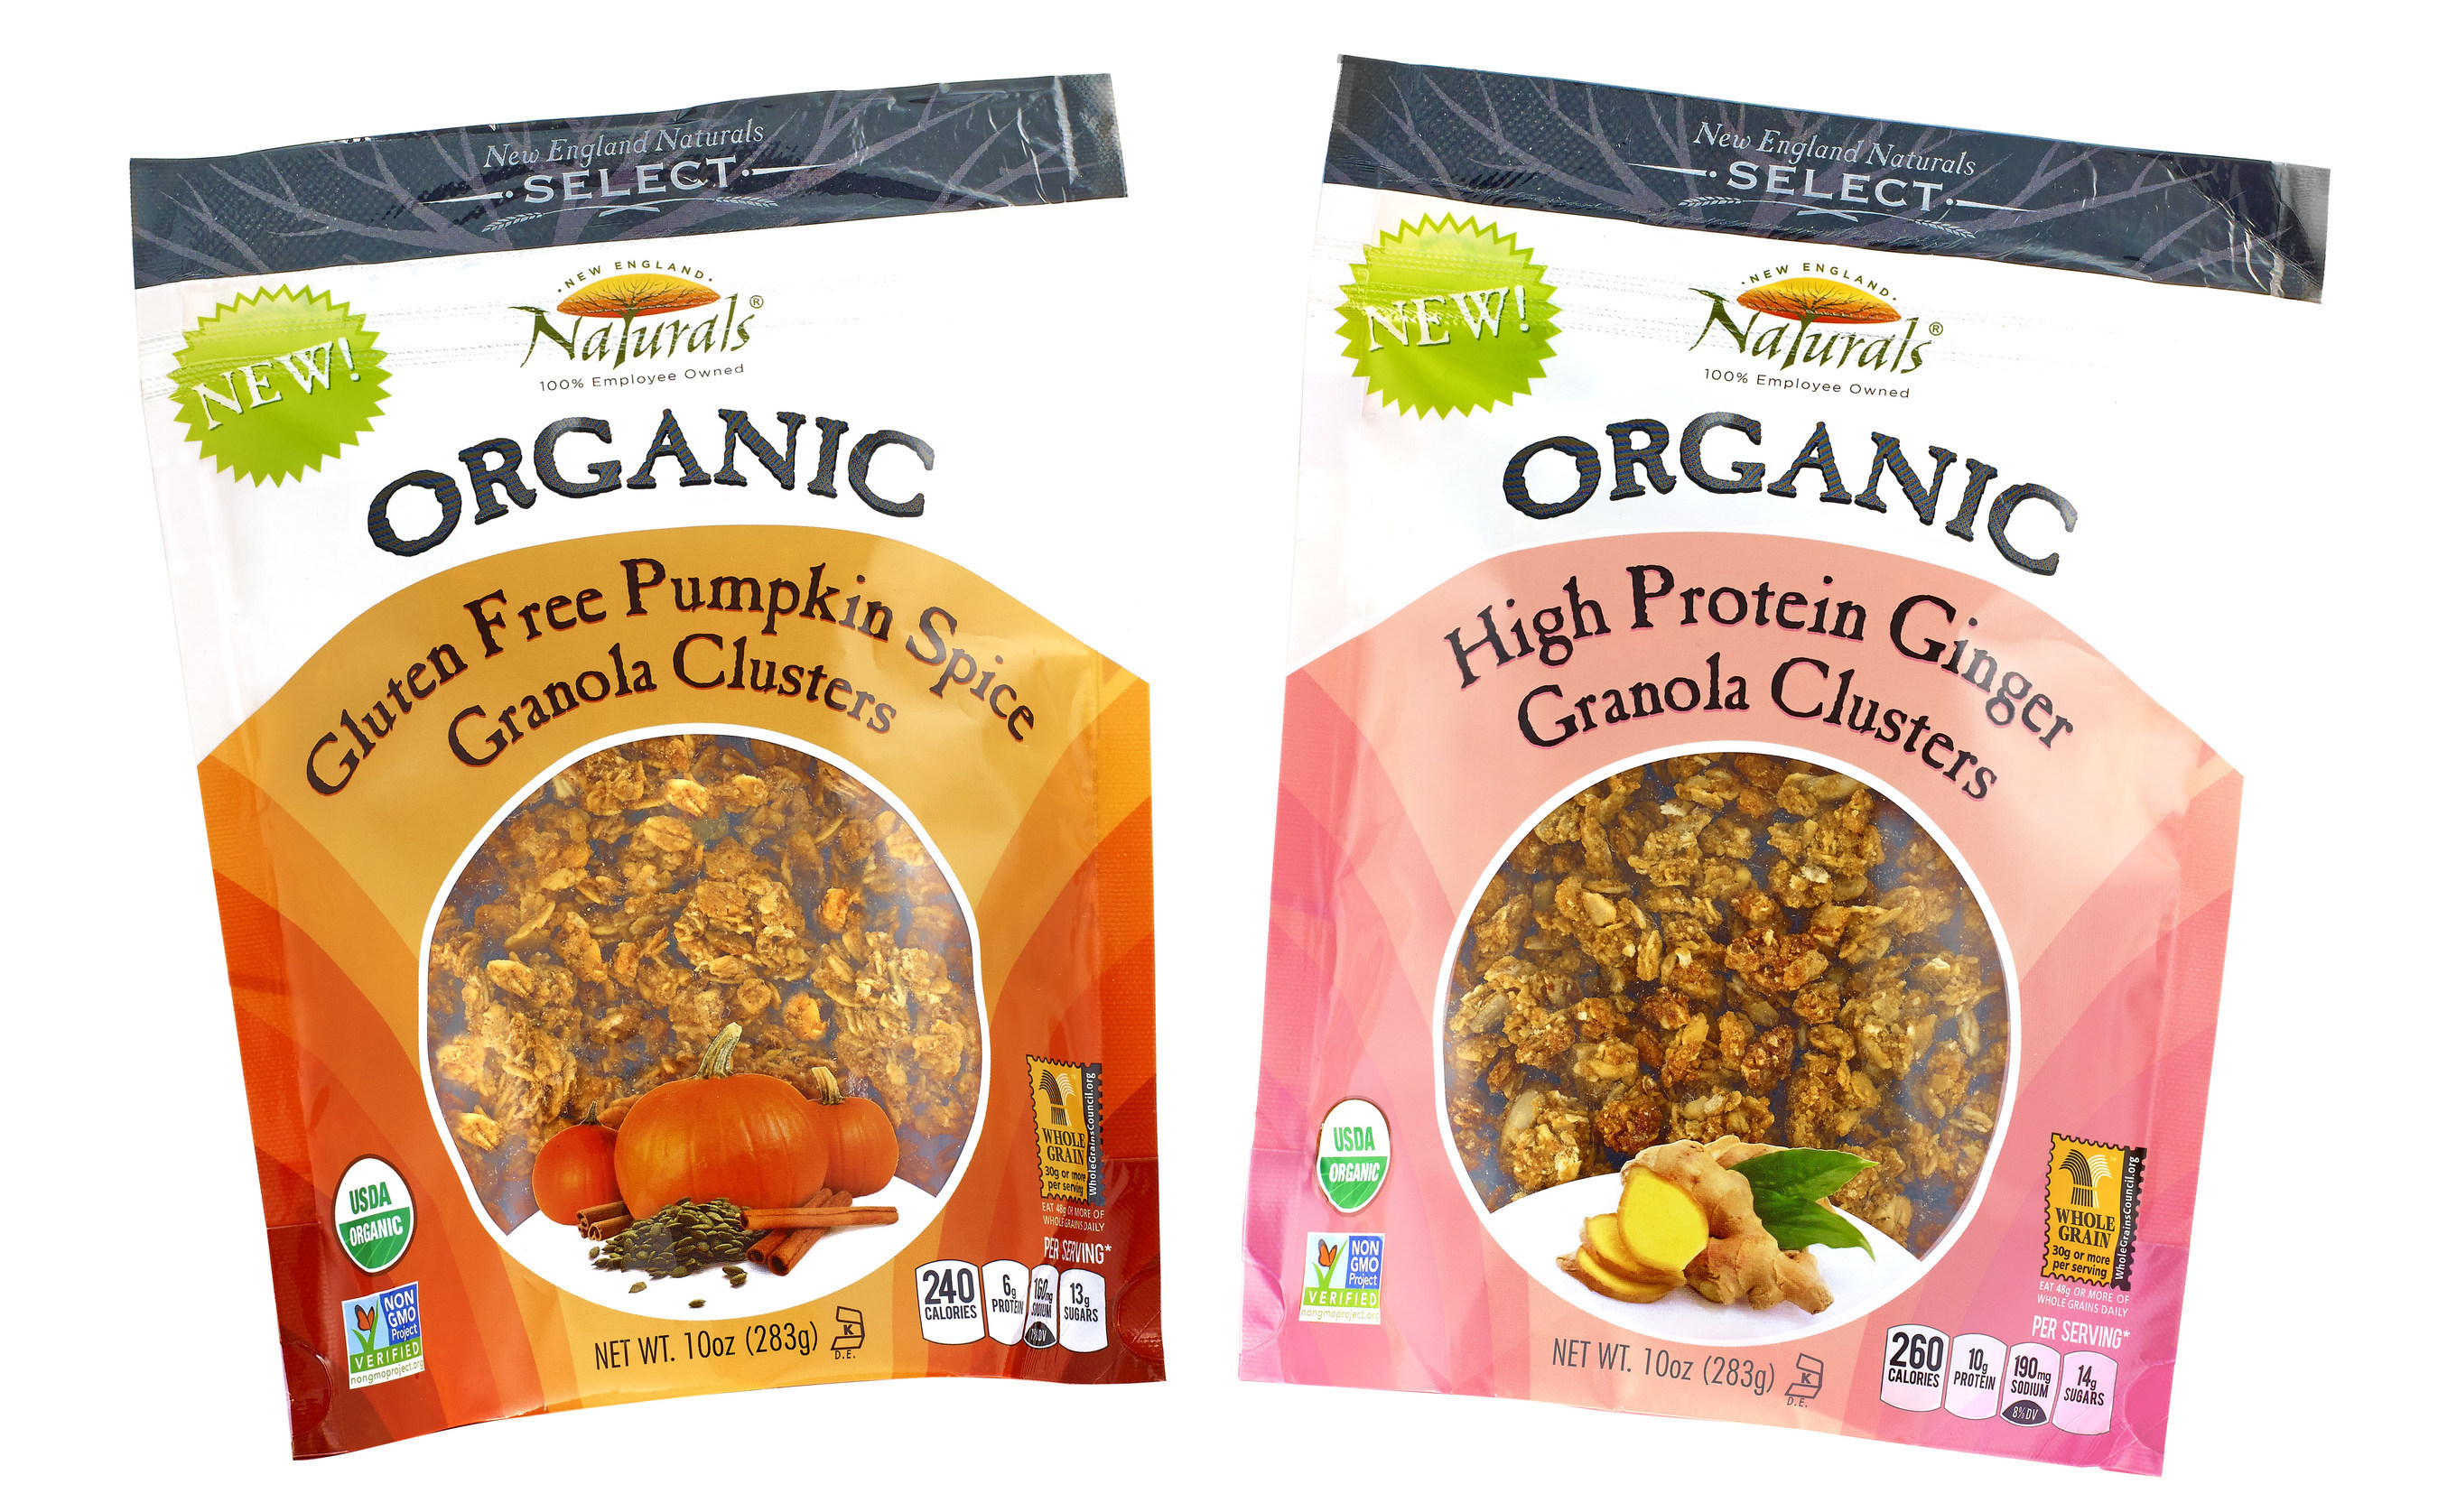 New England Natural Bakers: Gluten Free Pumpkin Spice Granola Clusters and High Protein Ginger Granola Clusters